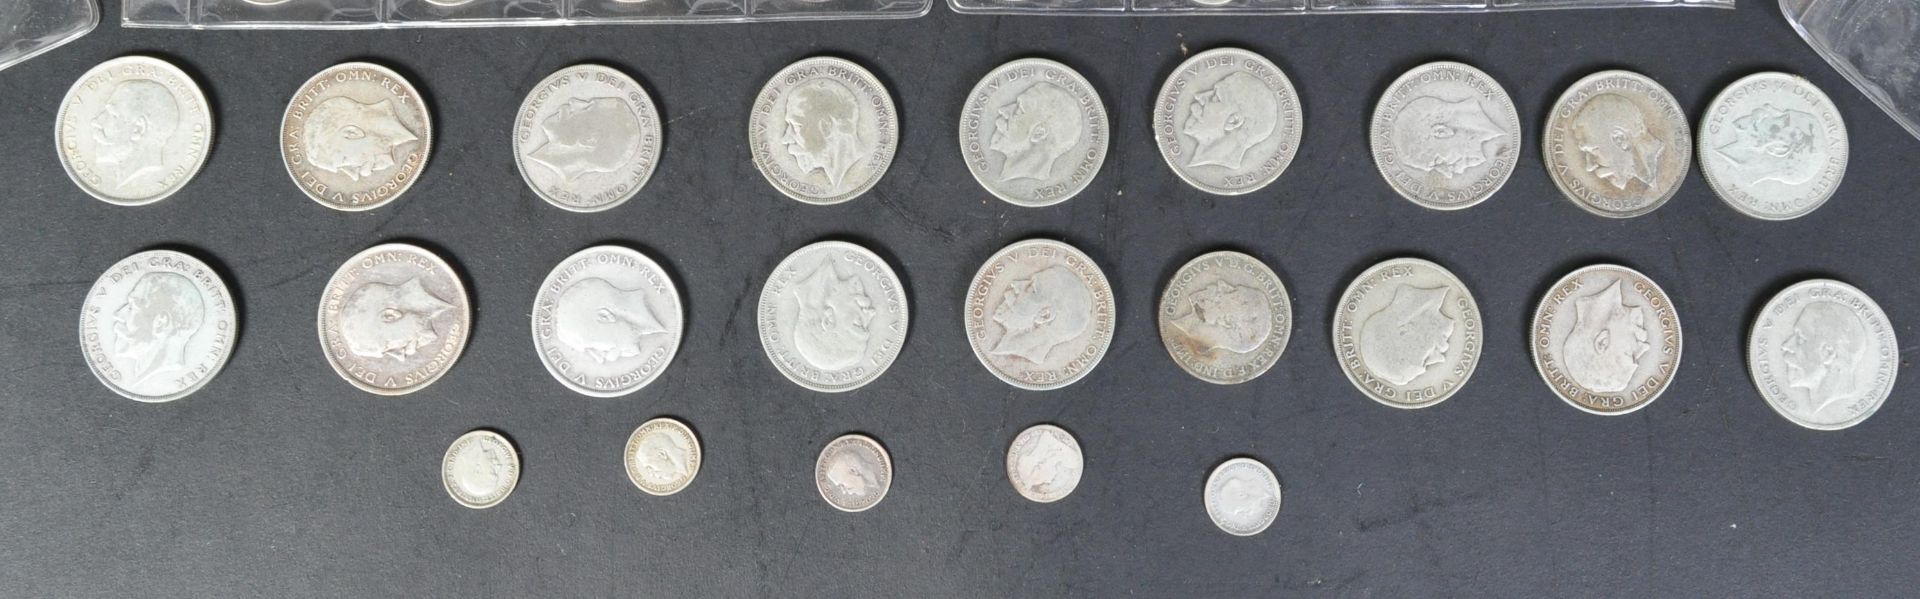 LARGE COLLECTION OF GEORGE V BRITISH COINS - Image 6 of 6